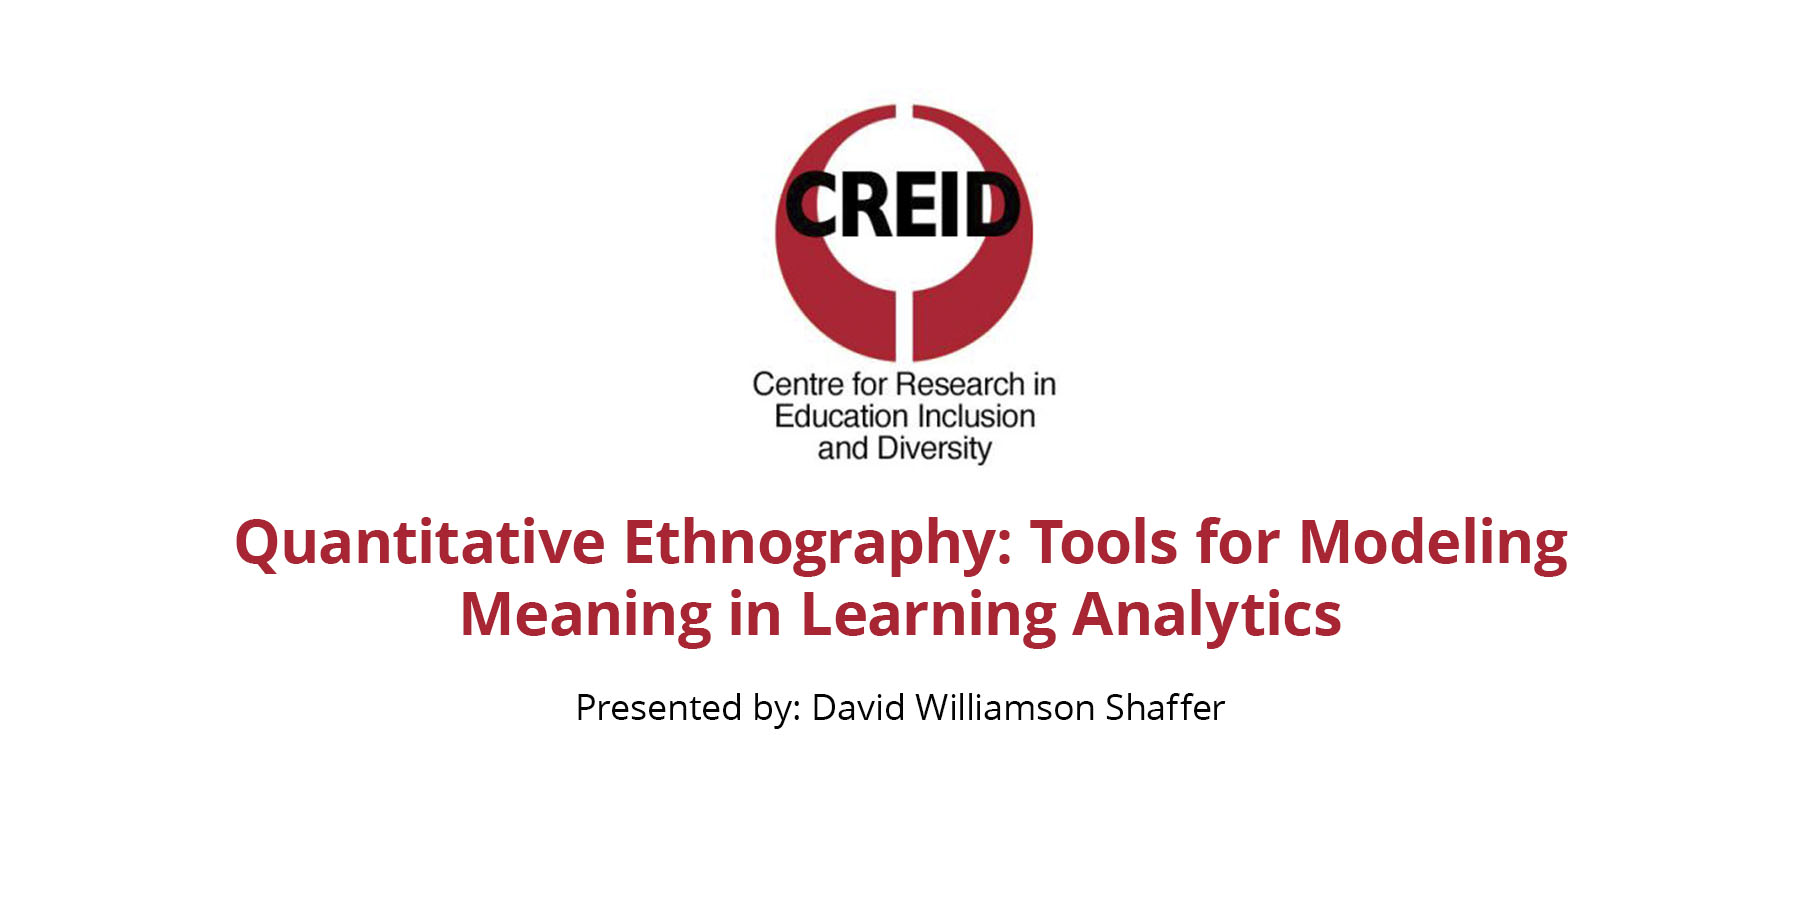 Quantitative Ethnography: Tools for Modeling Meaning in Learning Analytics